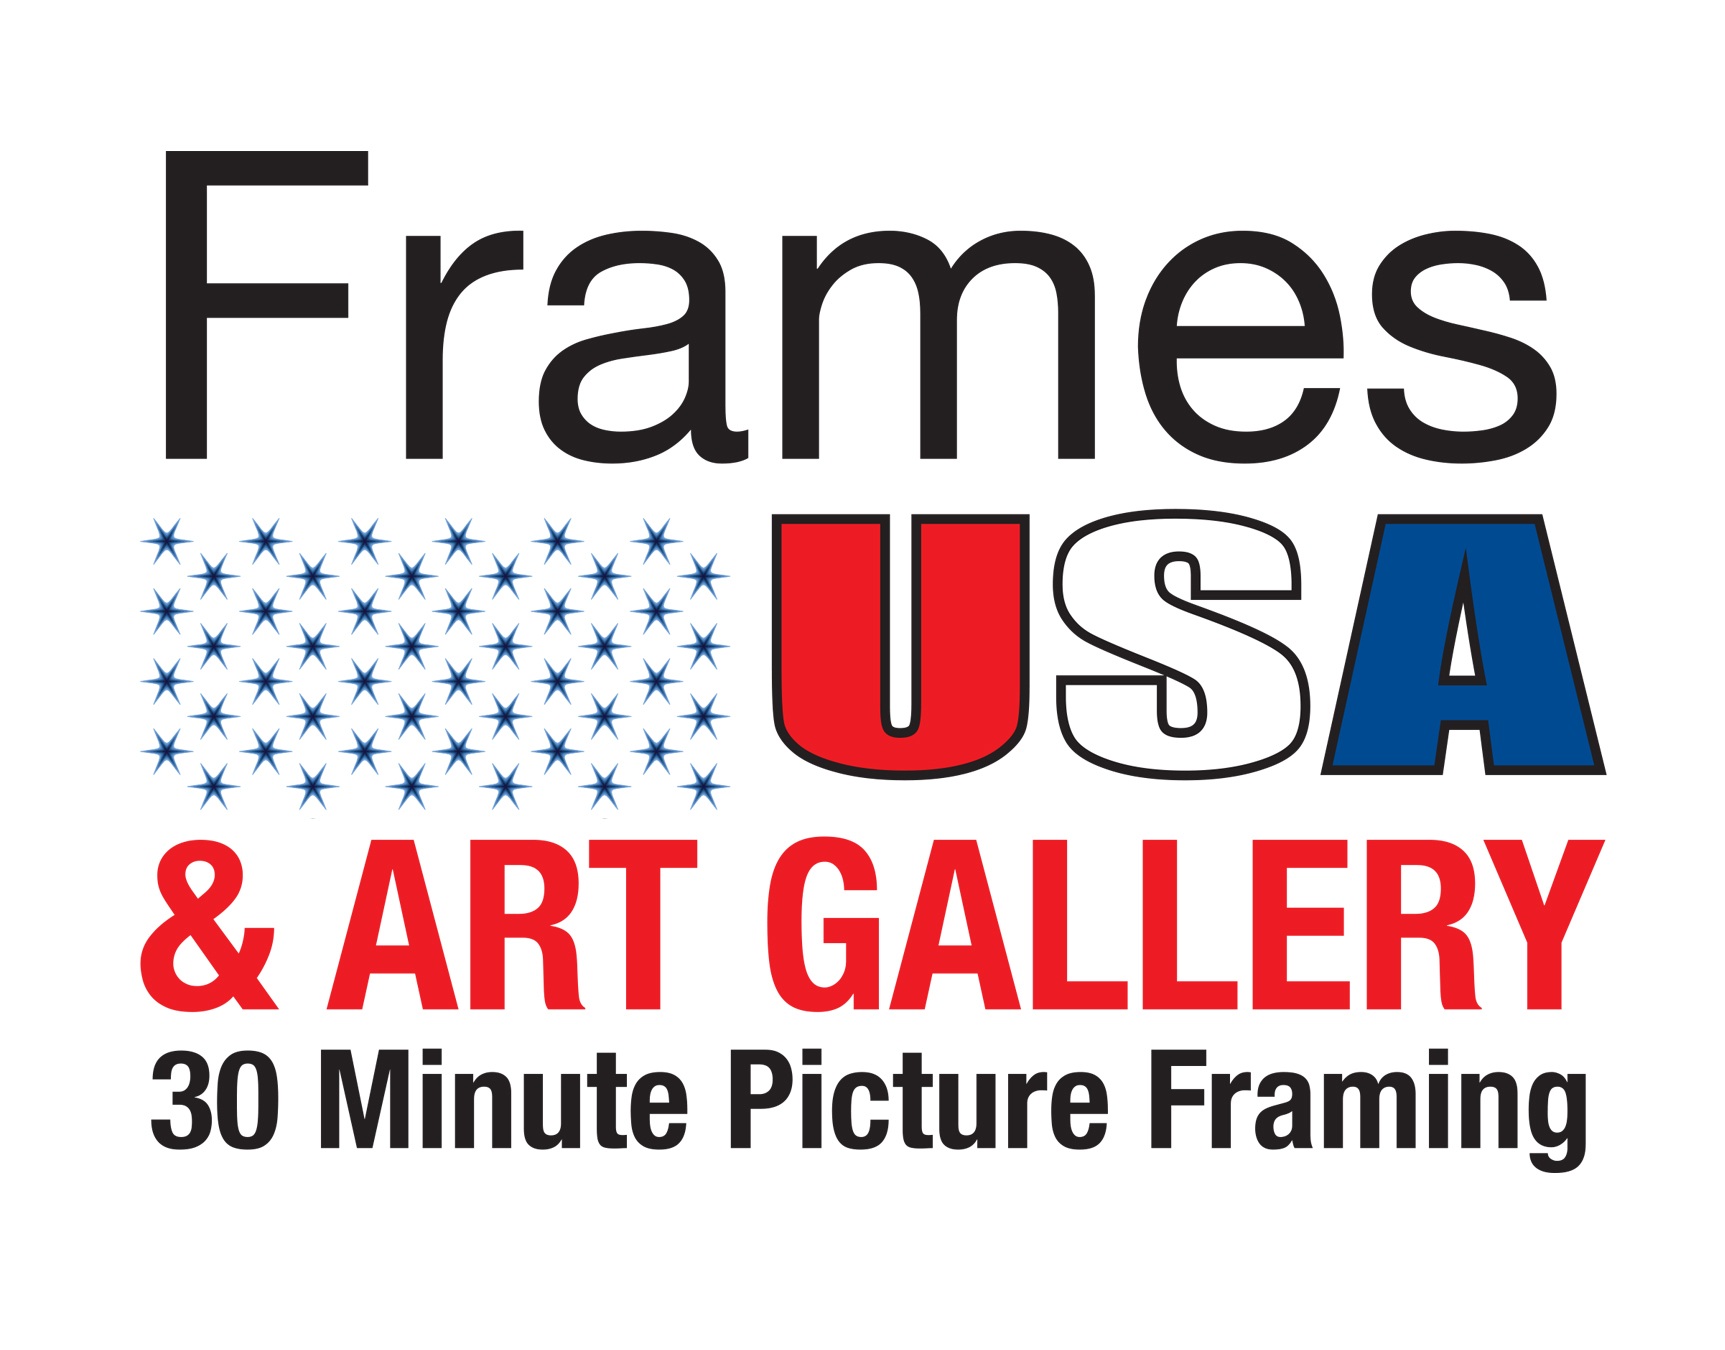 Frames USA & Art Gallery Coupons near me in Miami, FL 33155 | 8coupons